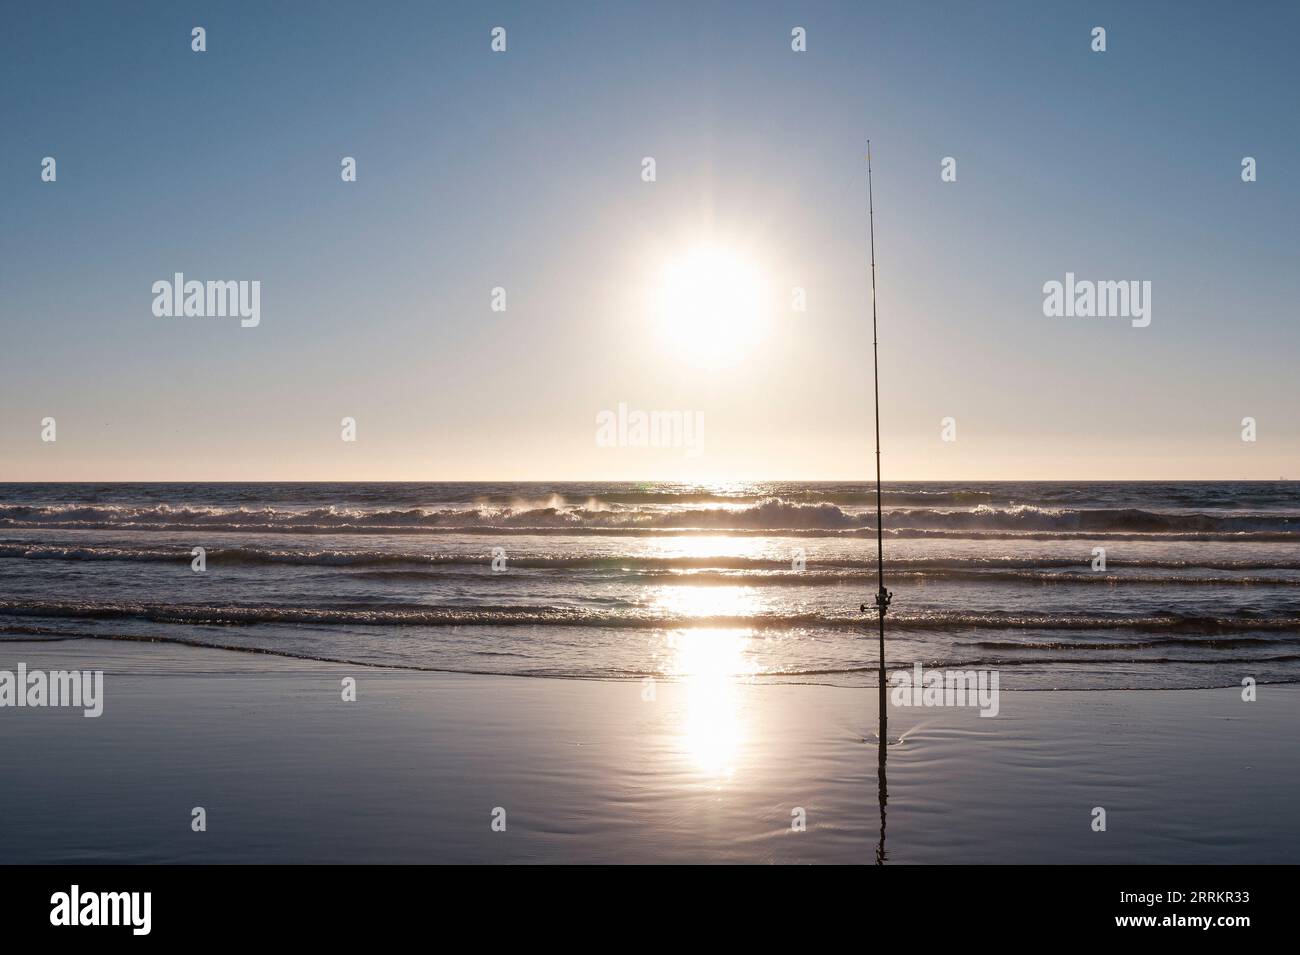 Fishing on the sandy beach by the sea Stock Photo